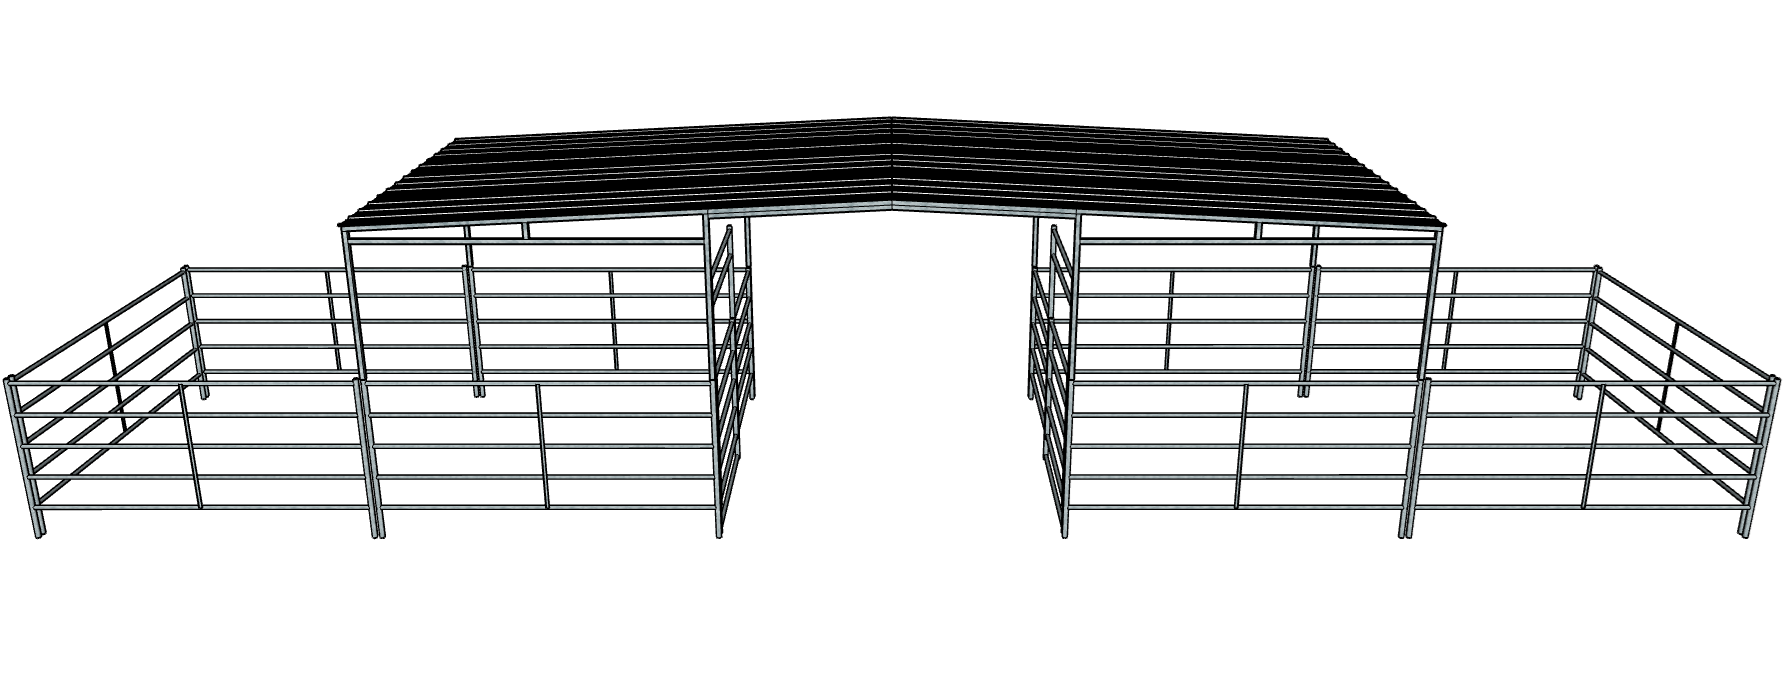 50 Ft X 10 Ft 5-Rail 2 Stall Barn Kit with 30 Ft by 10 Ft Gable Roof